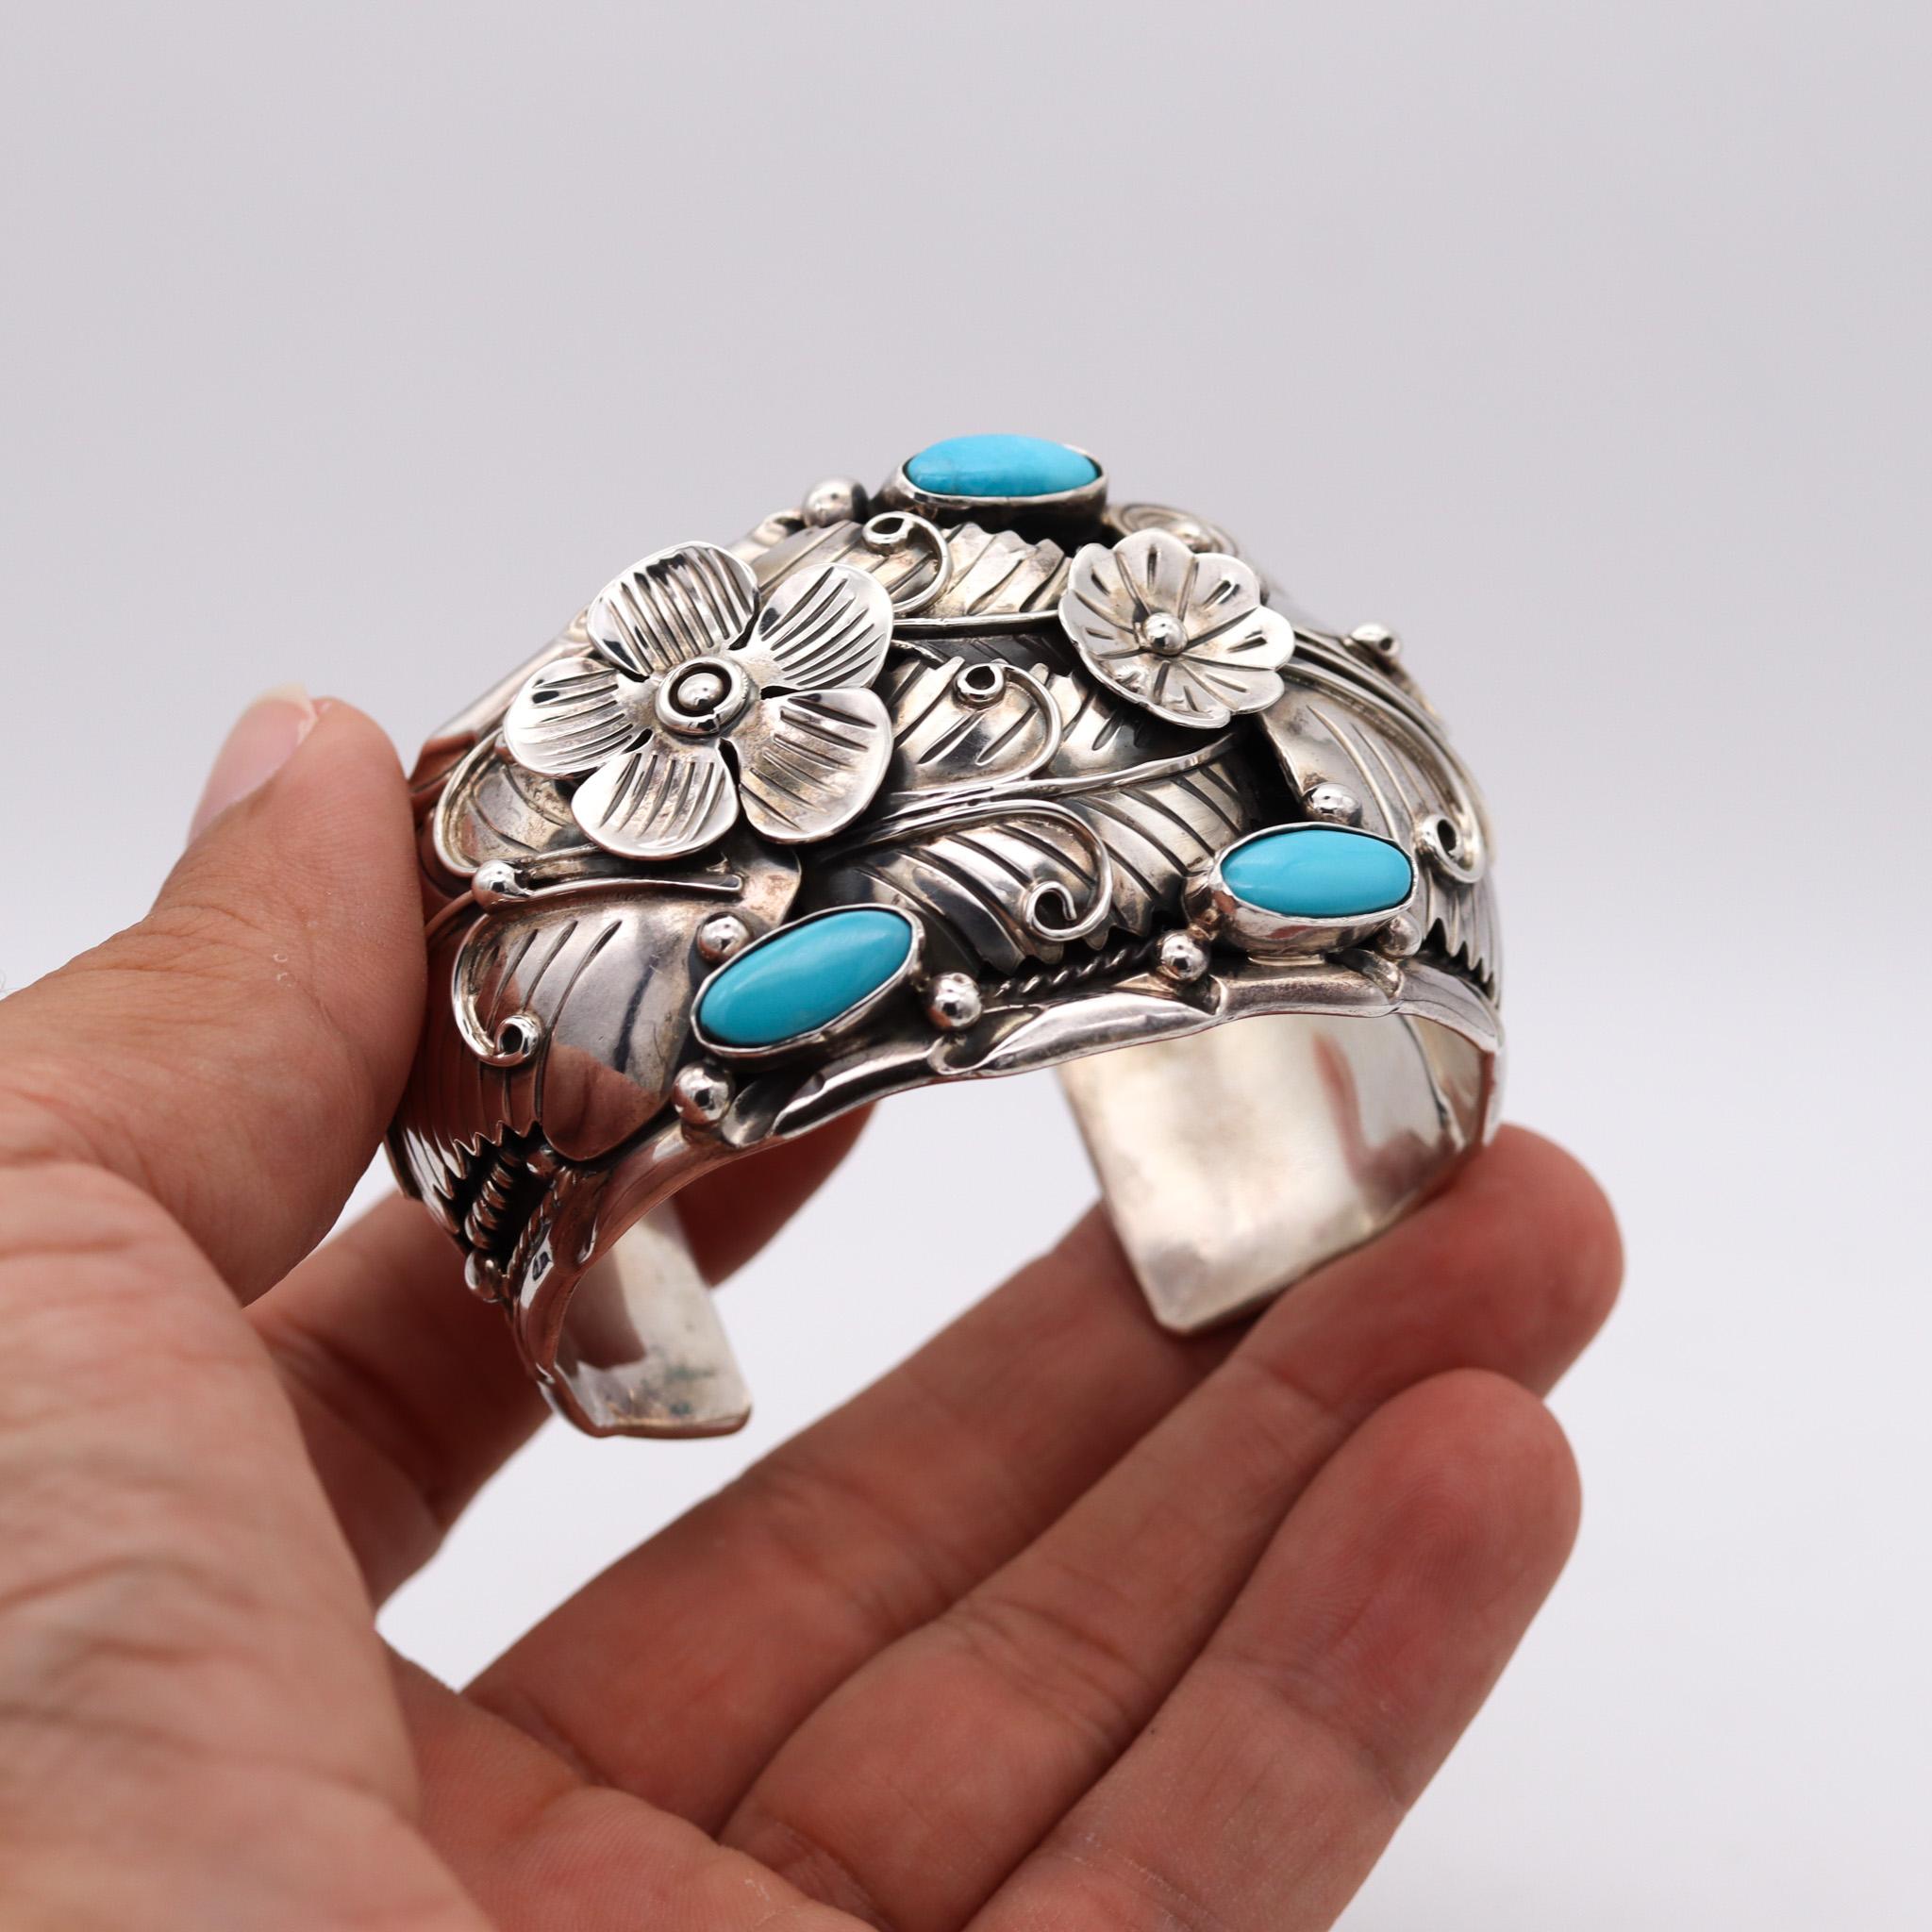 Mexico 1950 Taxco Statement Cuff Bracelet In 925 Sterling Silver With Turquoises For Sale 1